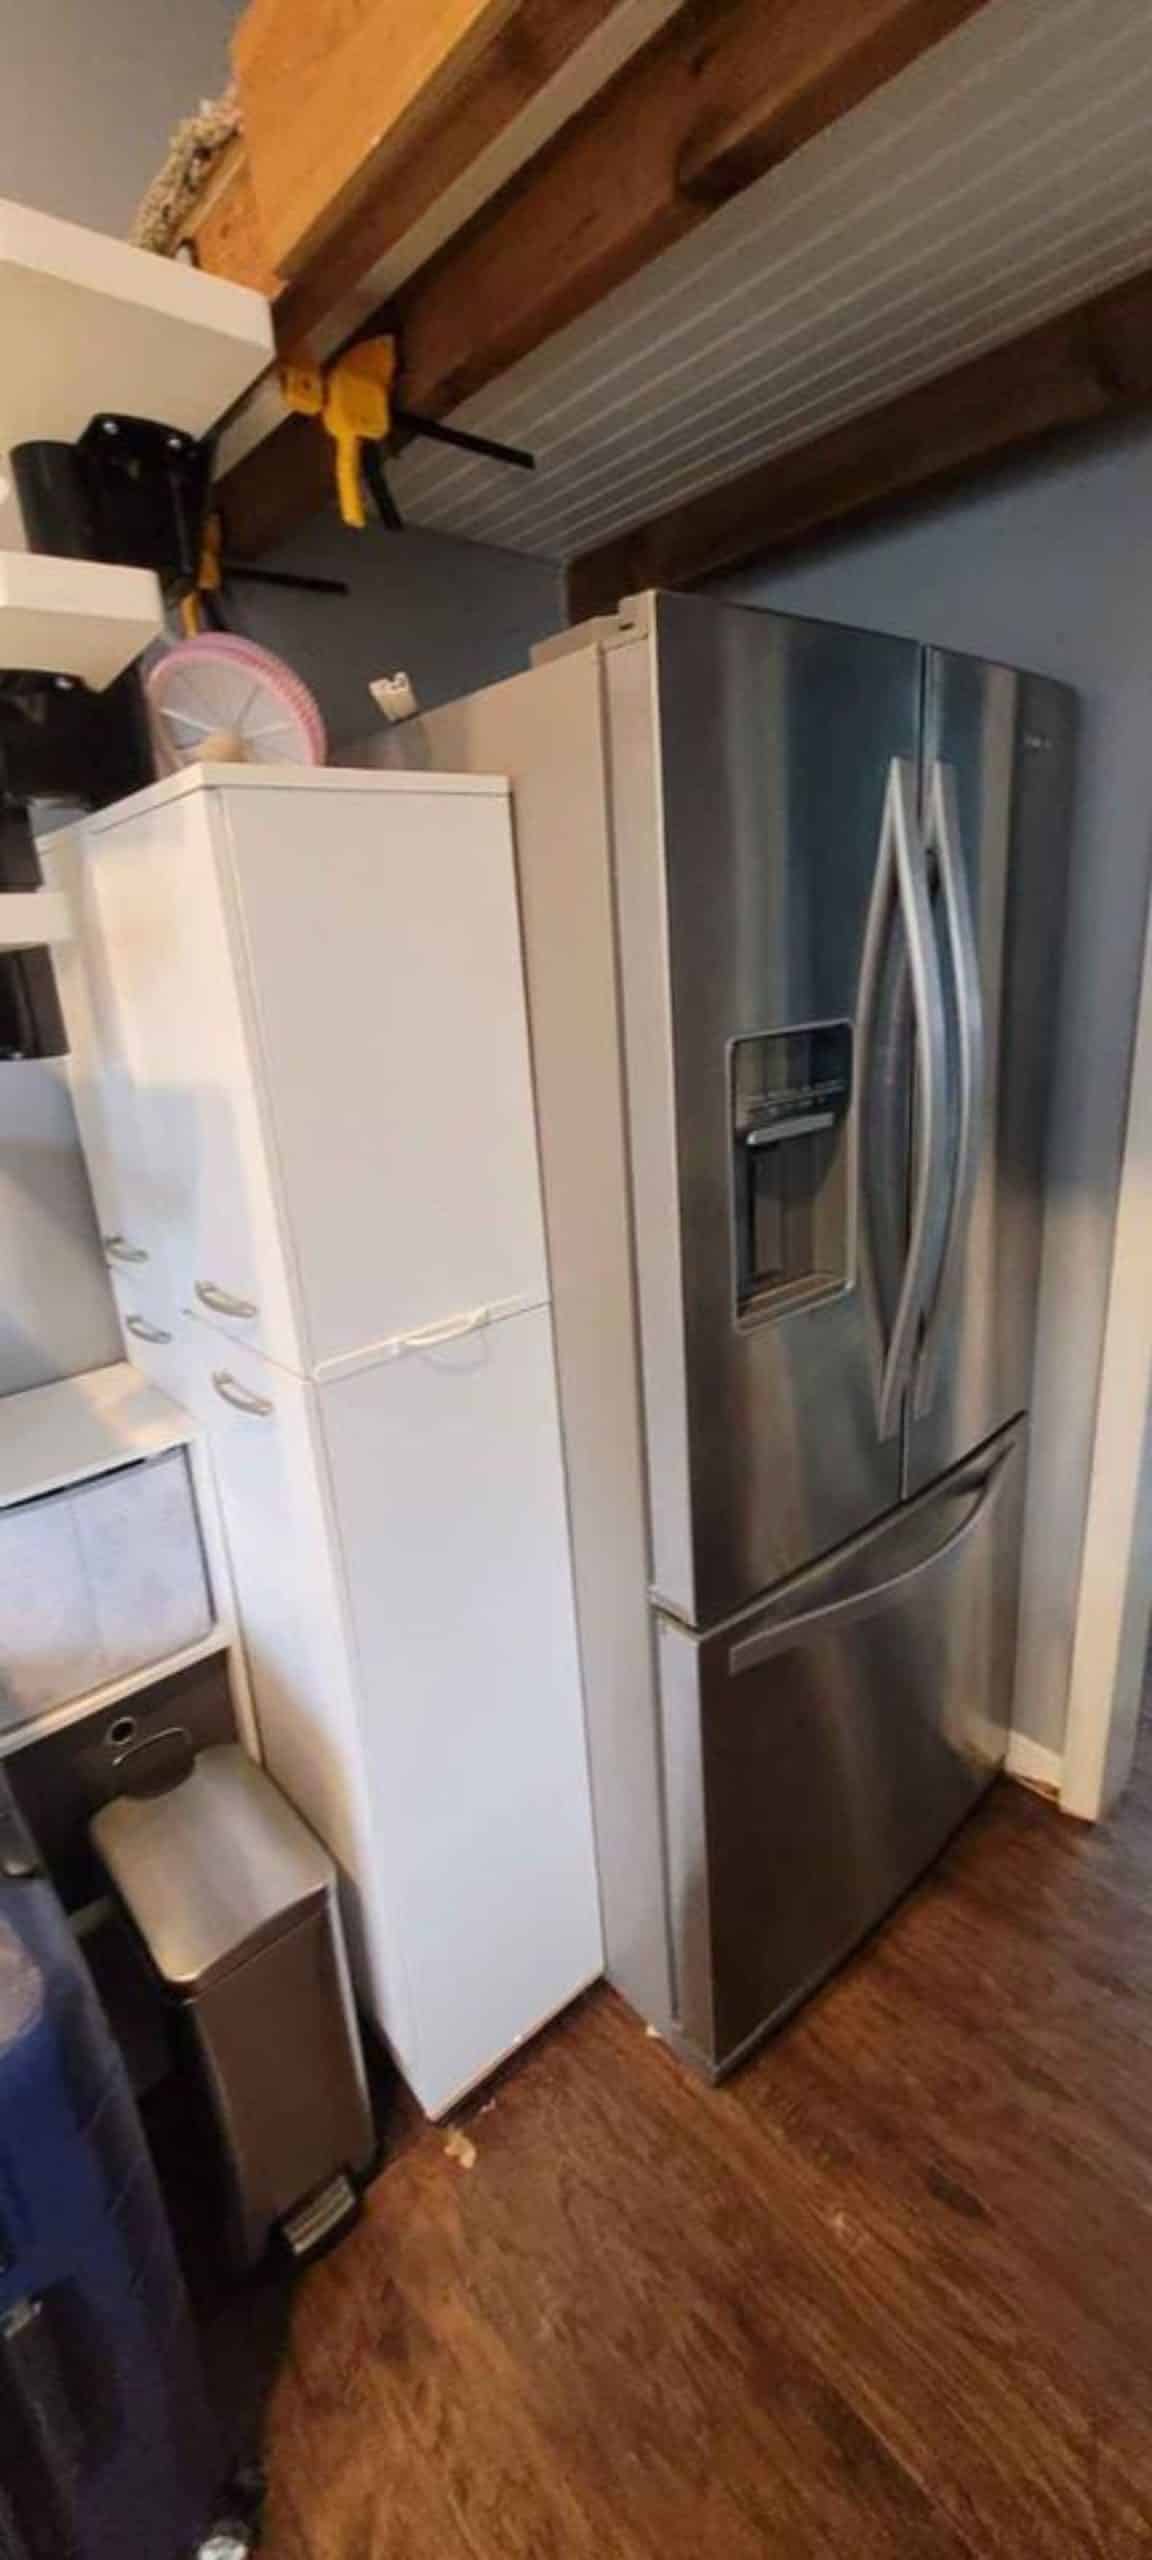 Refrigerator in kitchen area of 1 bedroom tiny home